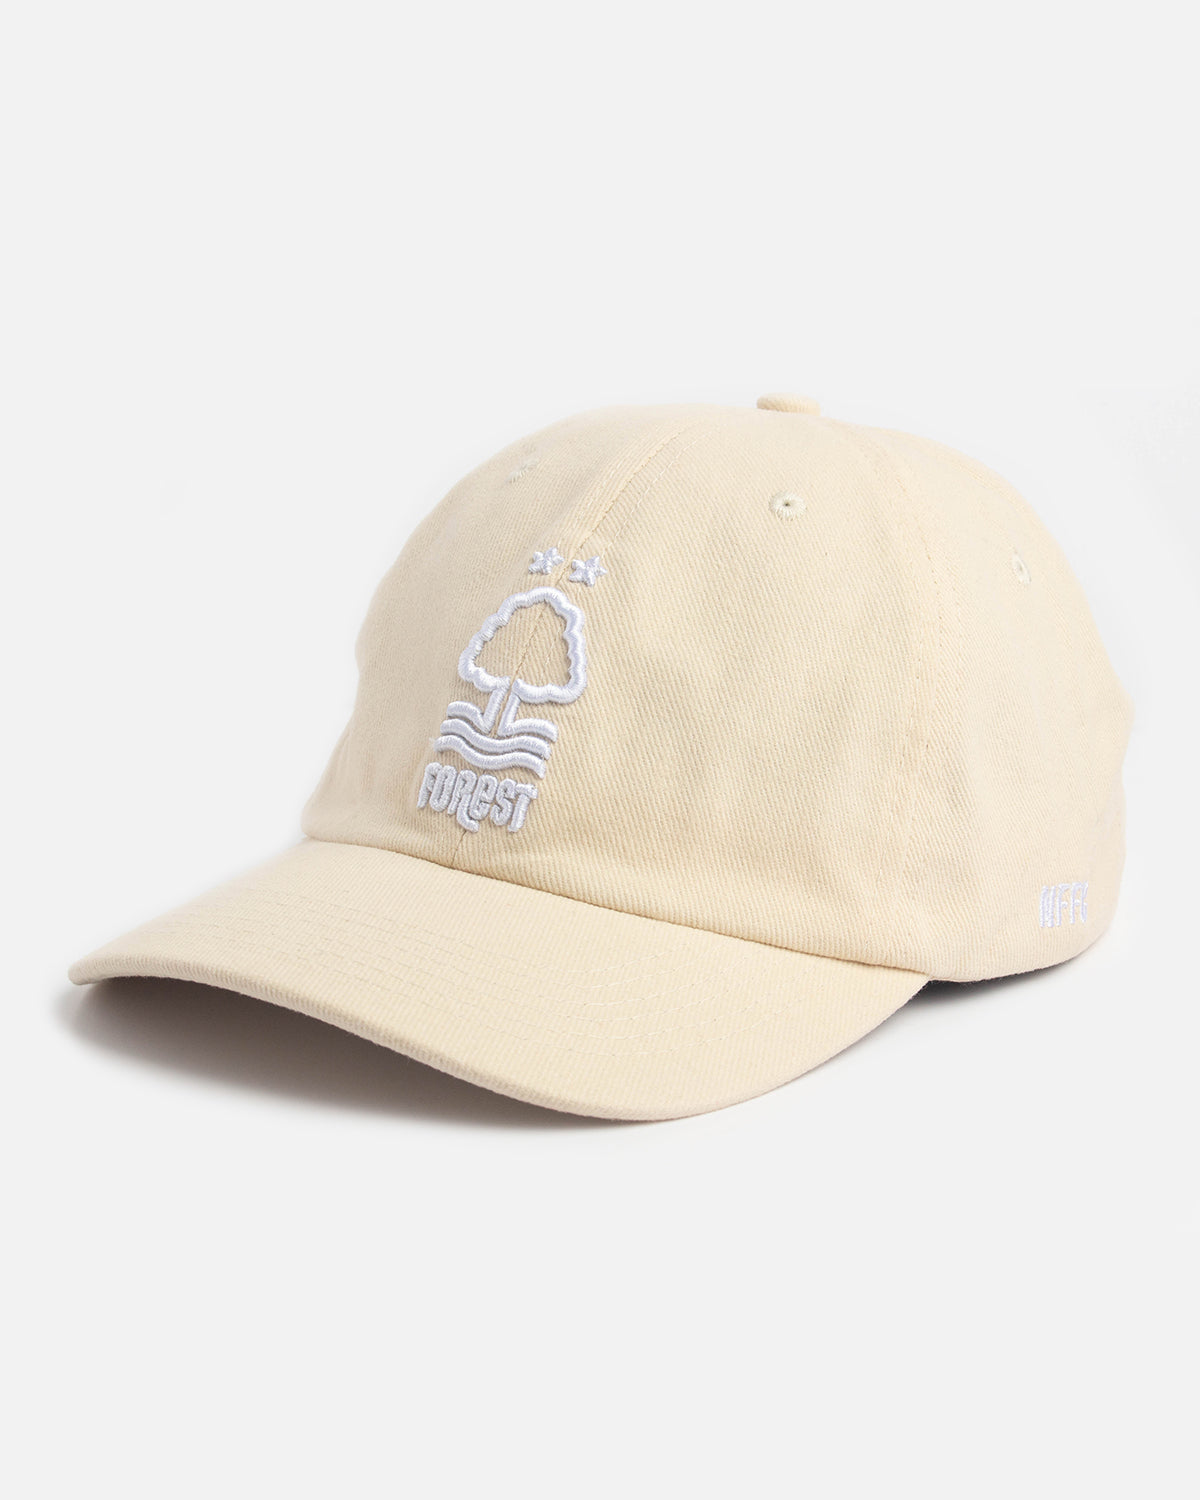 NFFC Off White Relaxed fit Cap